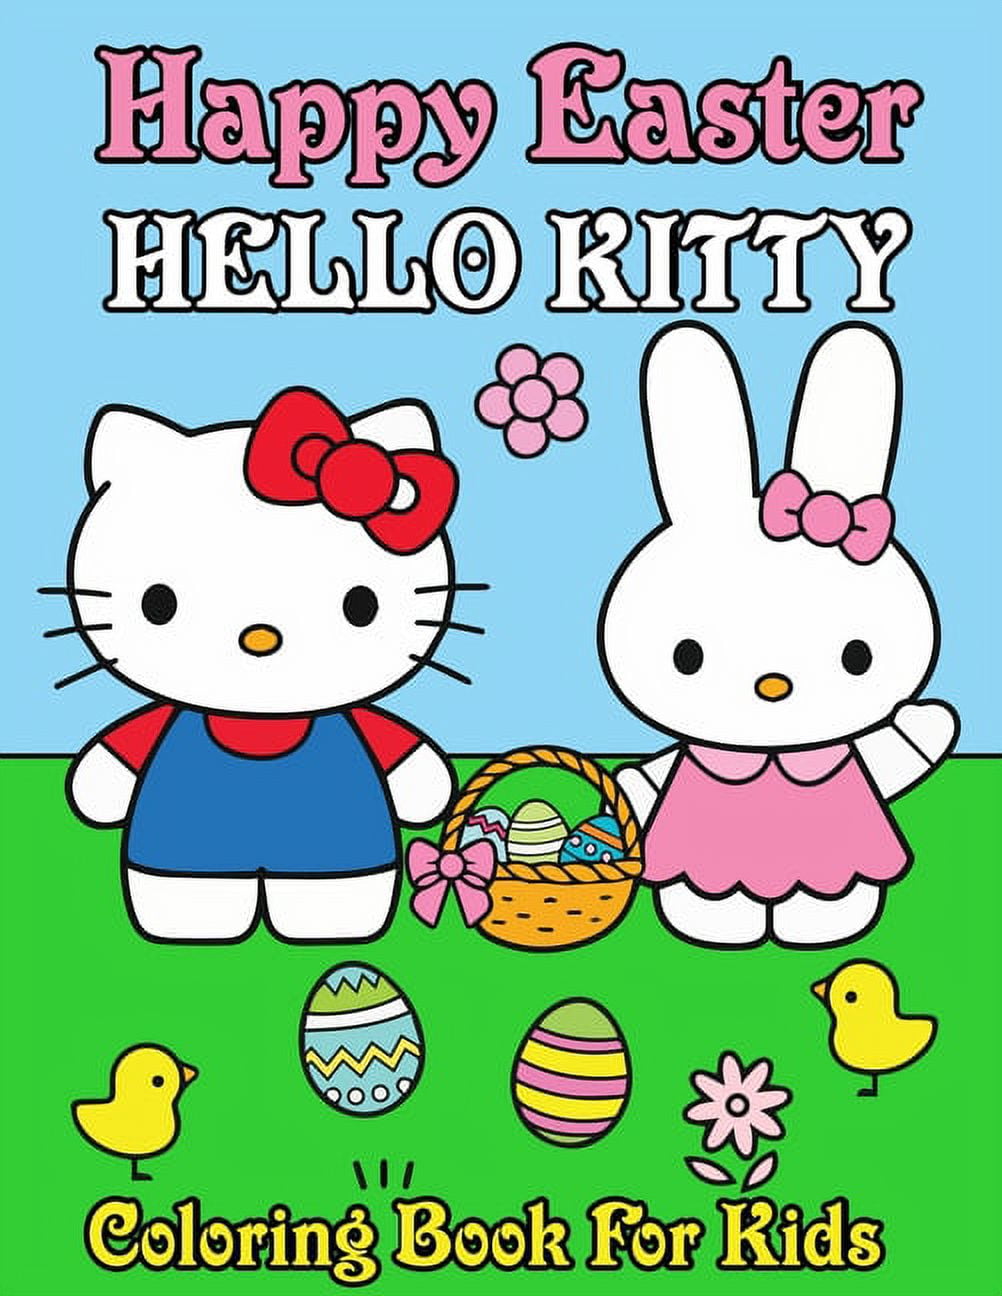 Hello Kitty Happy Easter Coloring Book For Kids: This Coloring Book  Featuring With Amazing Cute Different Hello Kitty Easter Eggs Bunny  Patterns Enjoy